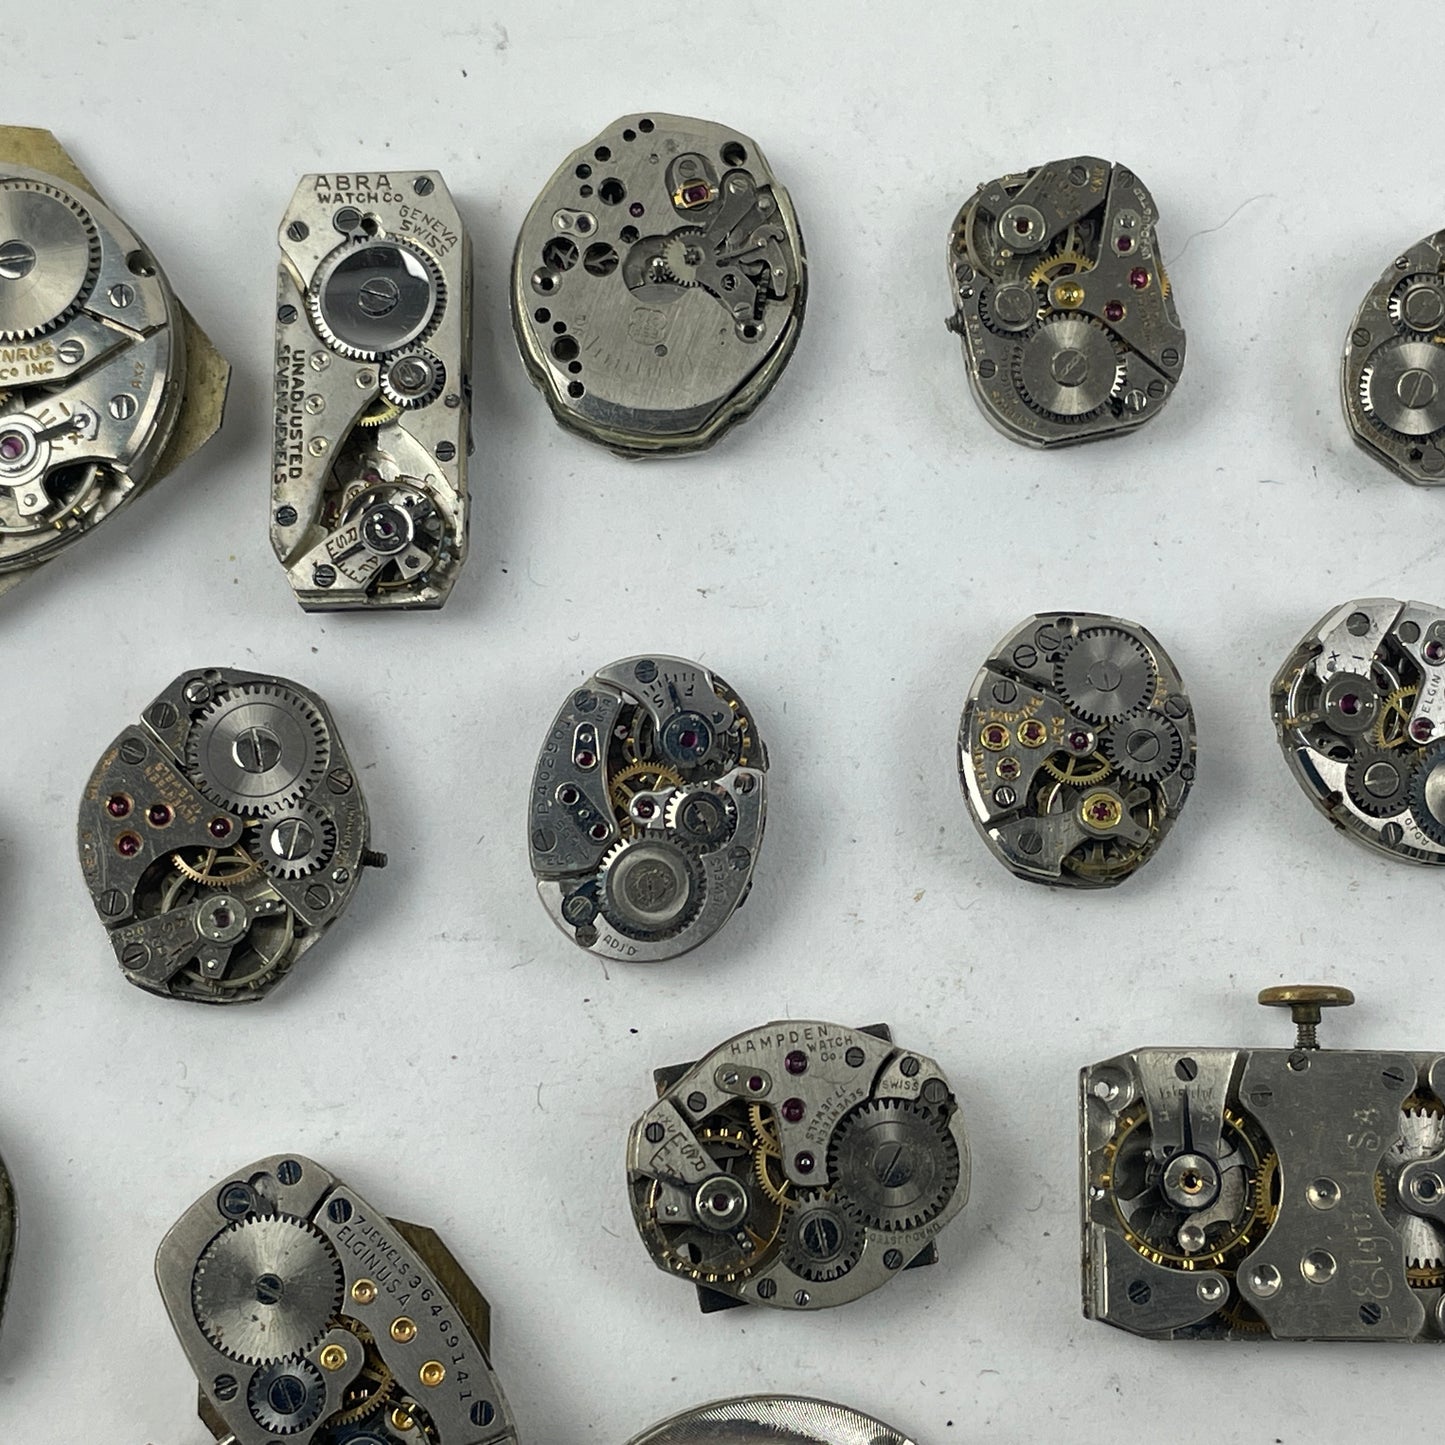 May Lot 6- Vintage Swiss & American Watch Movements